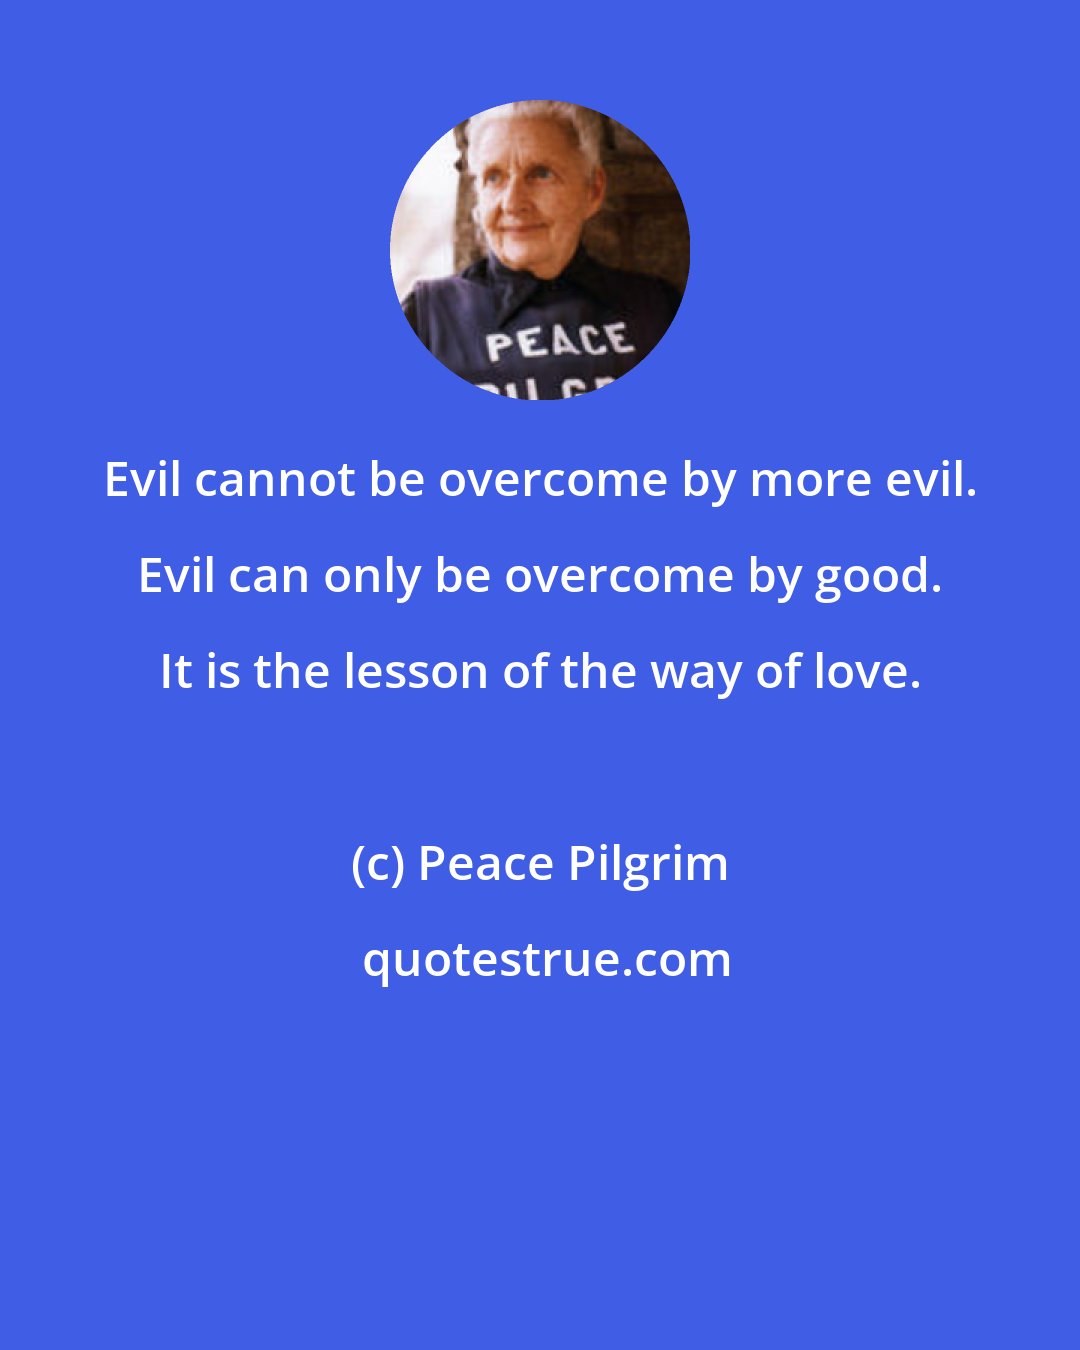 Peace Pilgrim: Evil cannot be overcome by more evil. Evil can only be overcome by good. It is the lesson of the way of love.